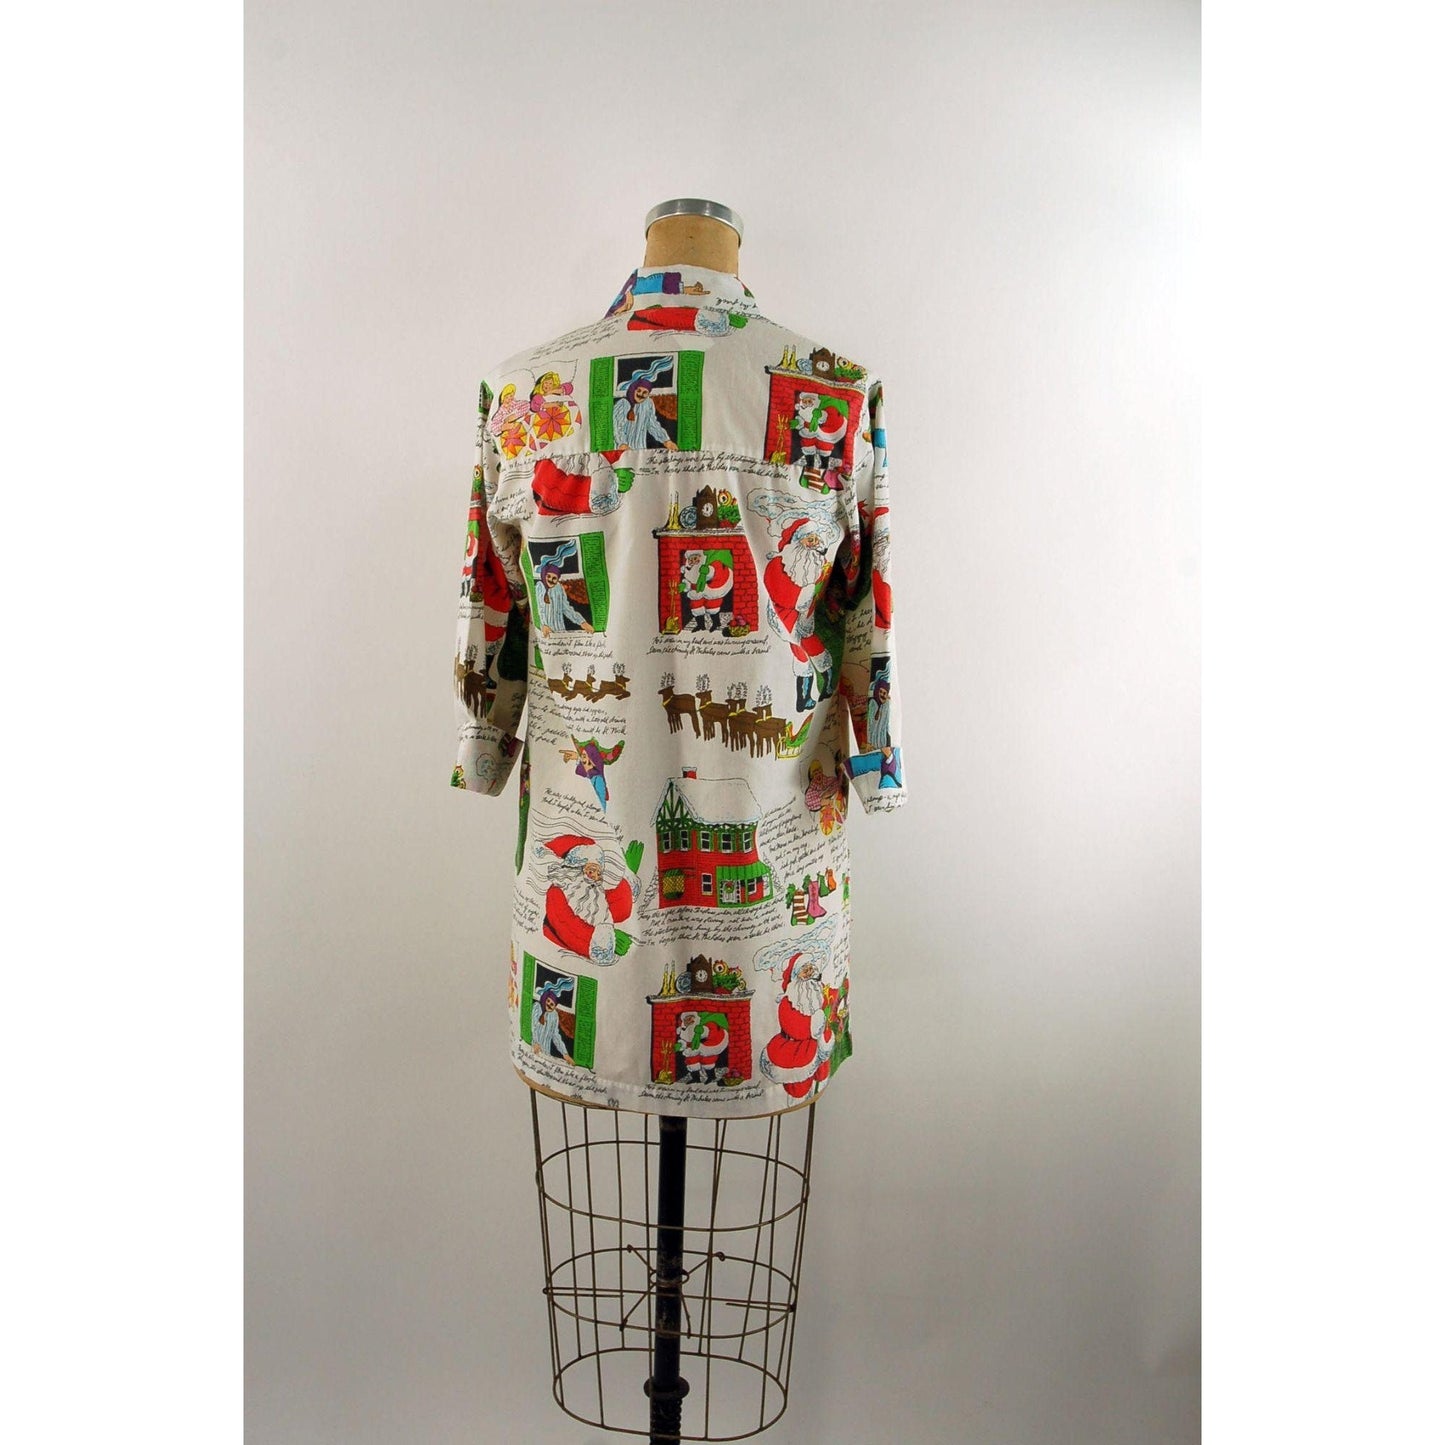 Novelty Christmas smock top shirt Night Before Christmas cartoons by Andhurst Size M